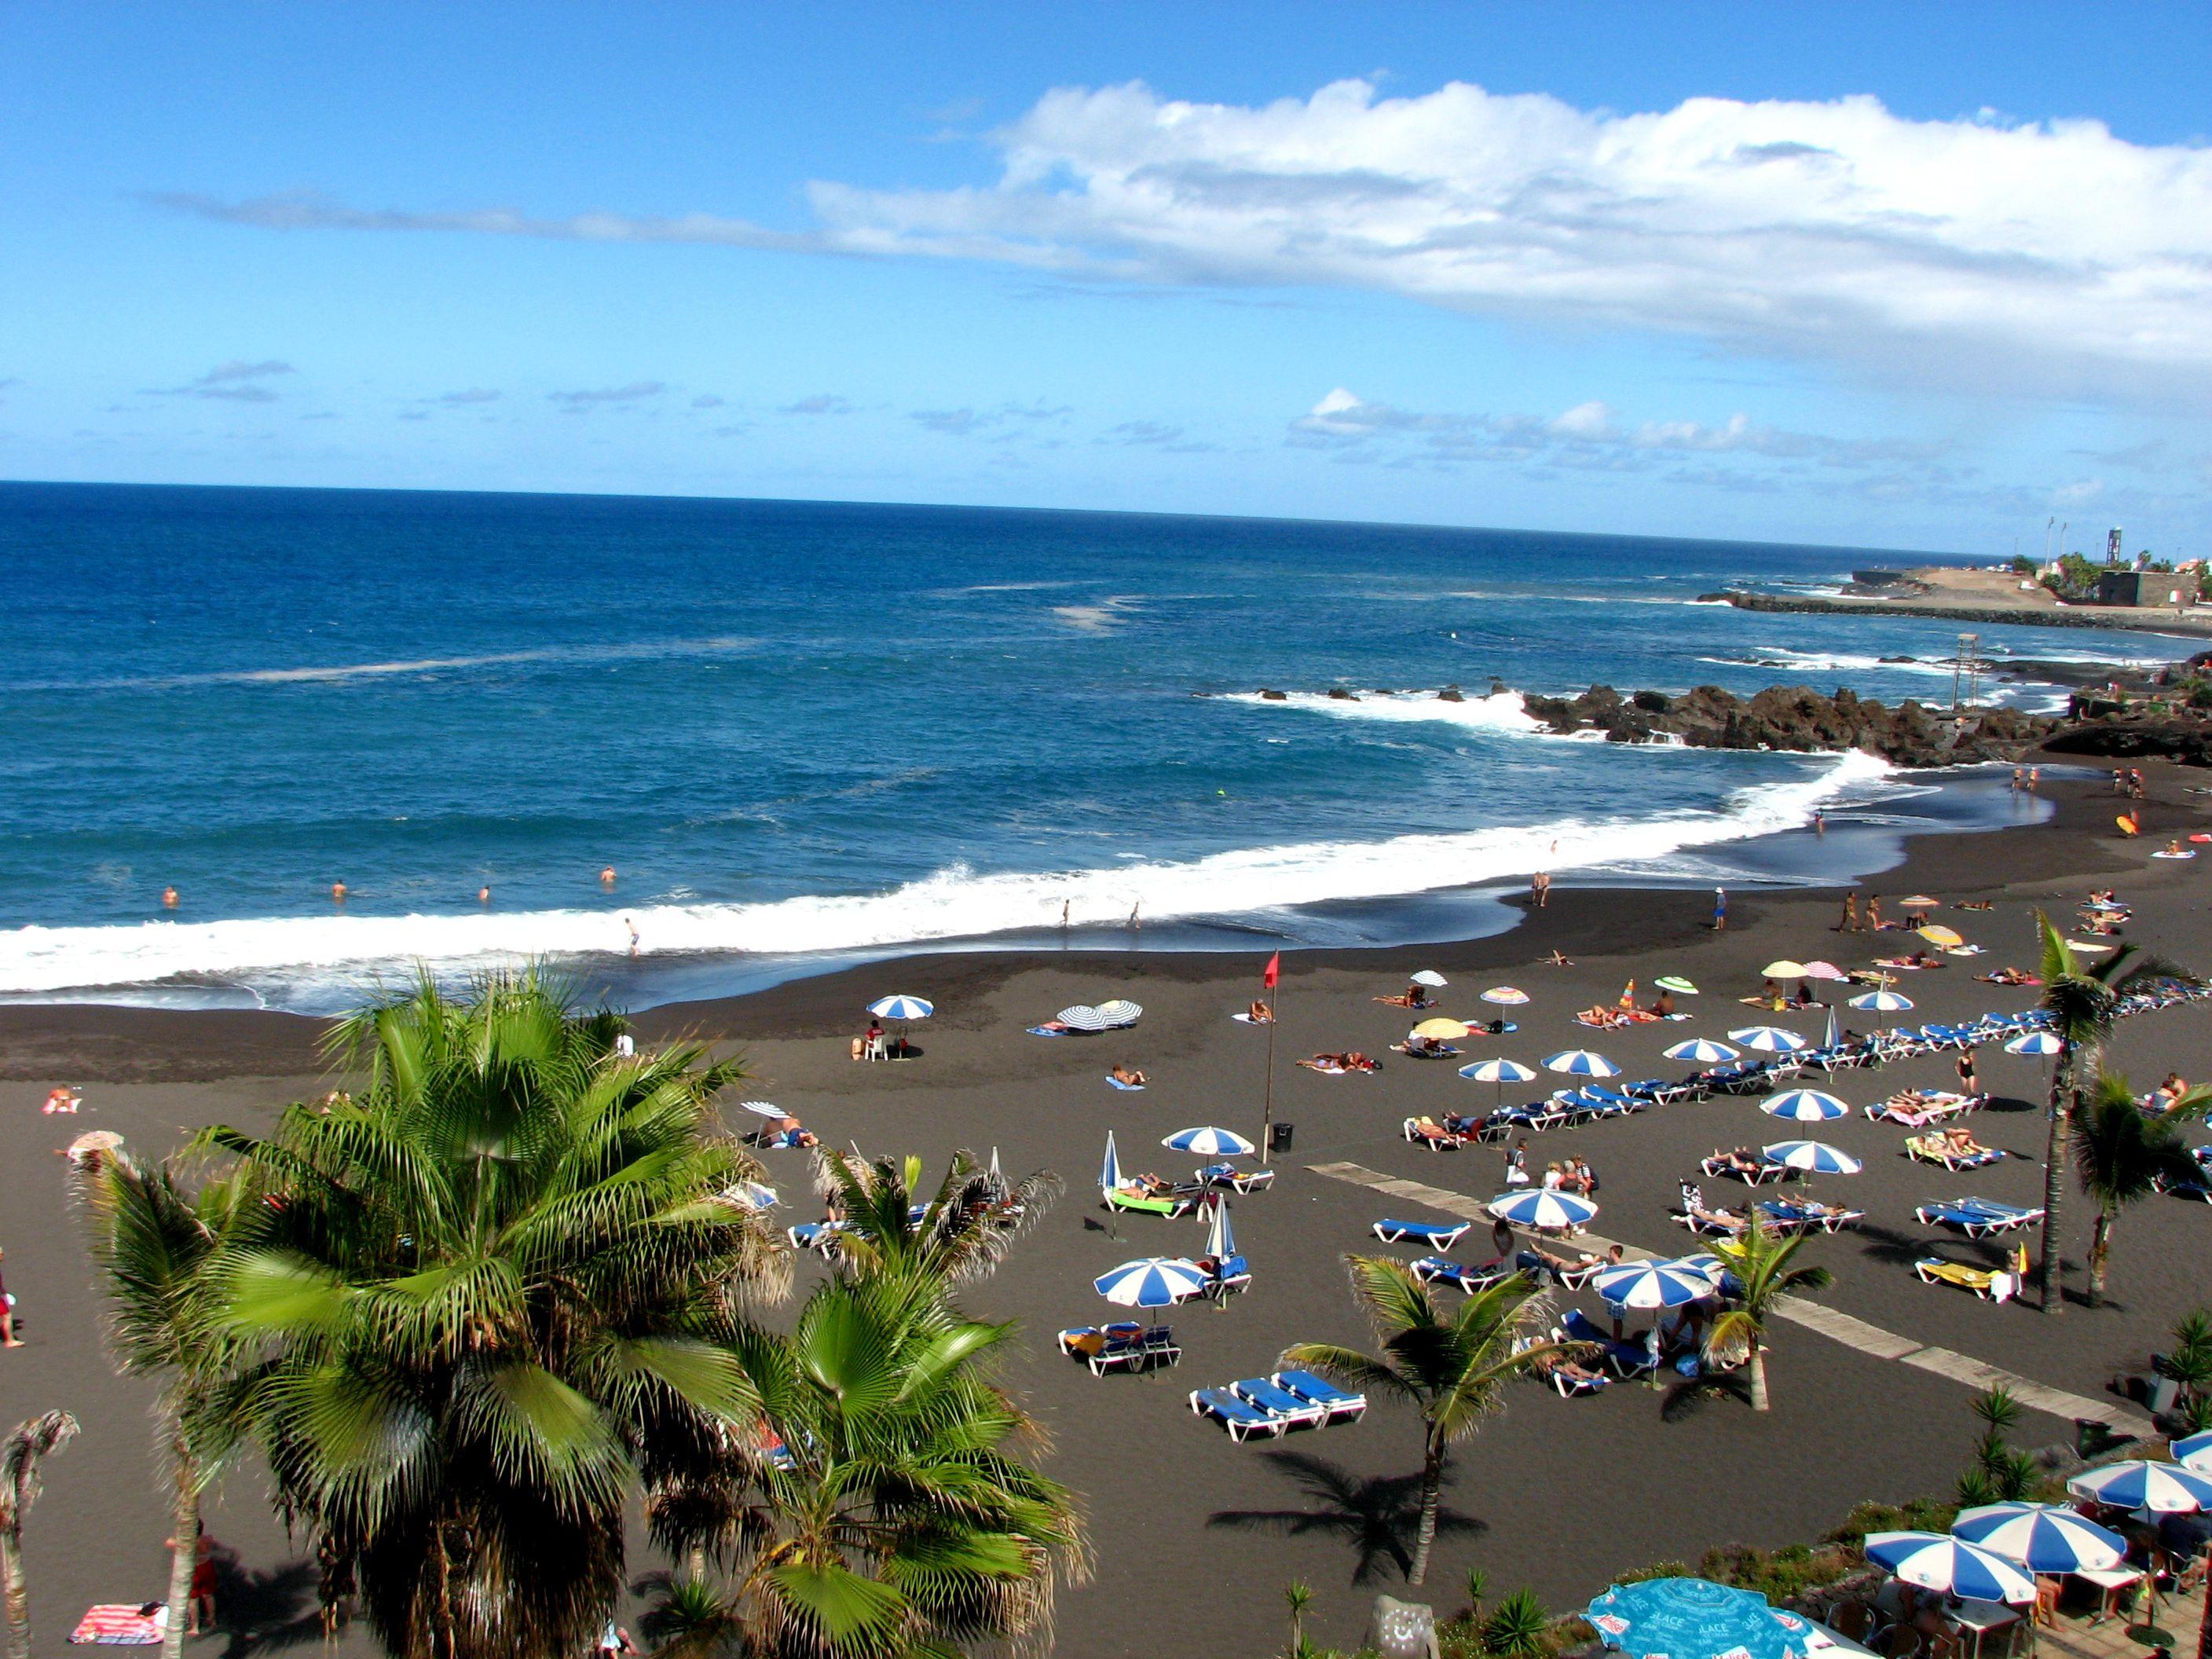 Tourism on the black beach in Tenerife wallpaper and image